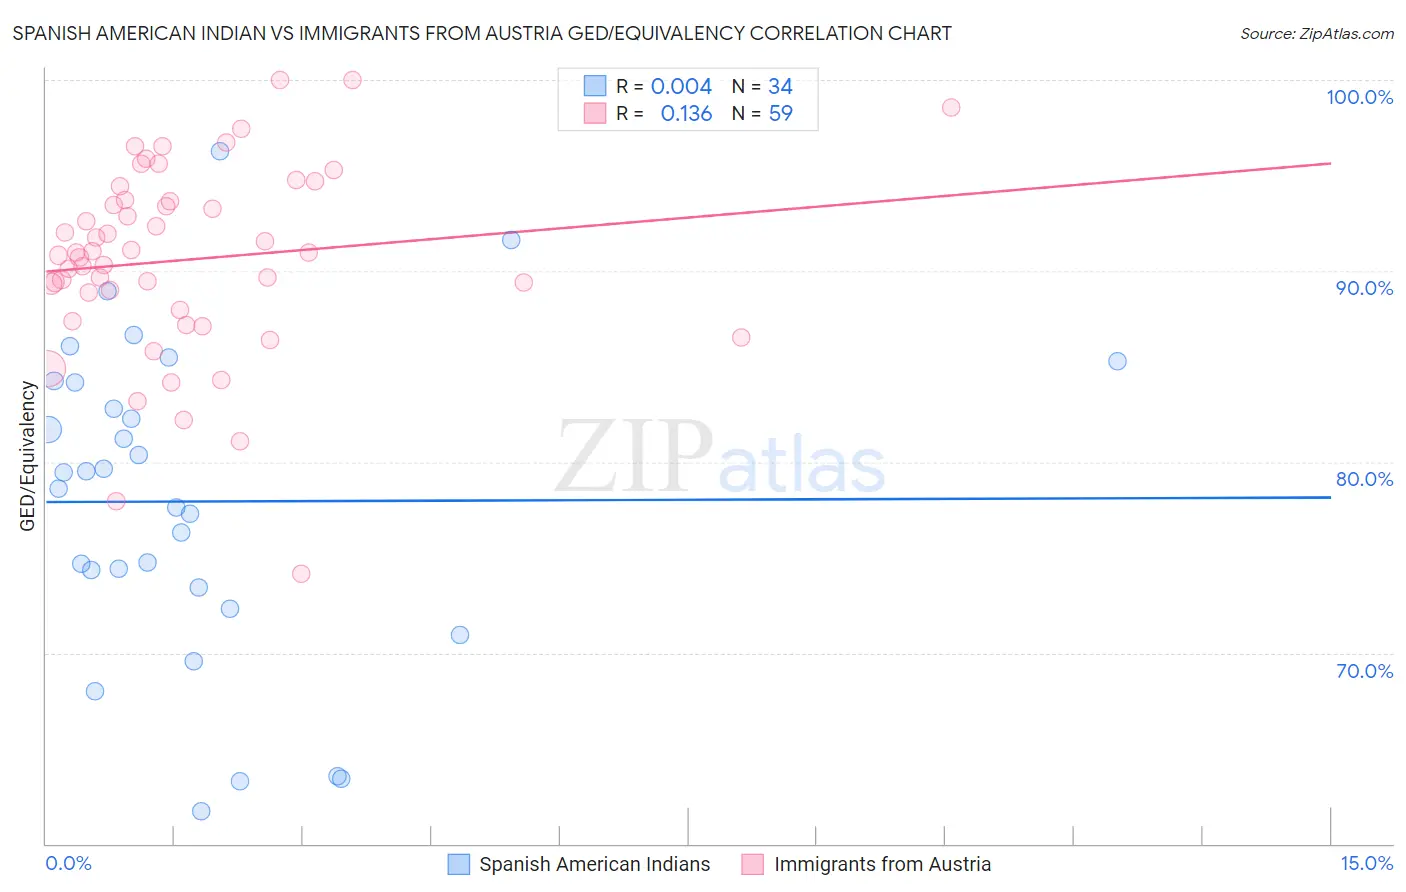 Spanish American Indian vs Immigrants from Austria GED/Equivalency